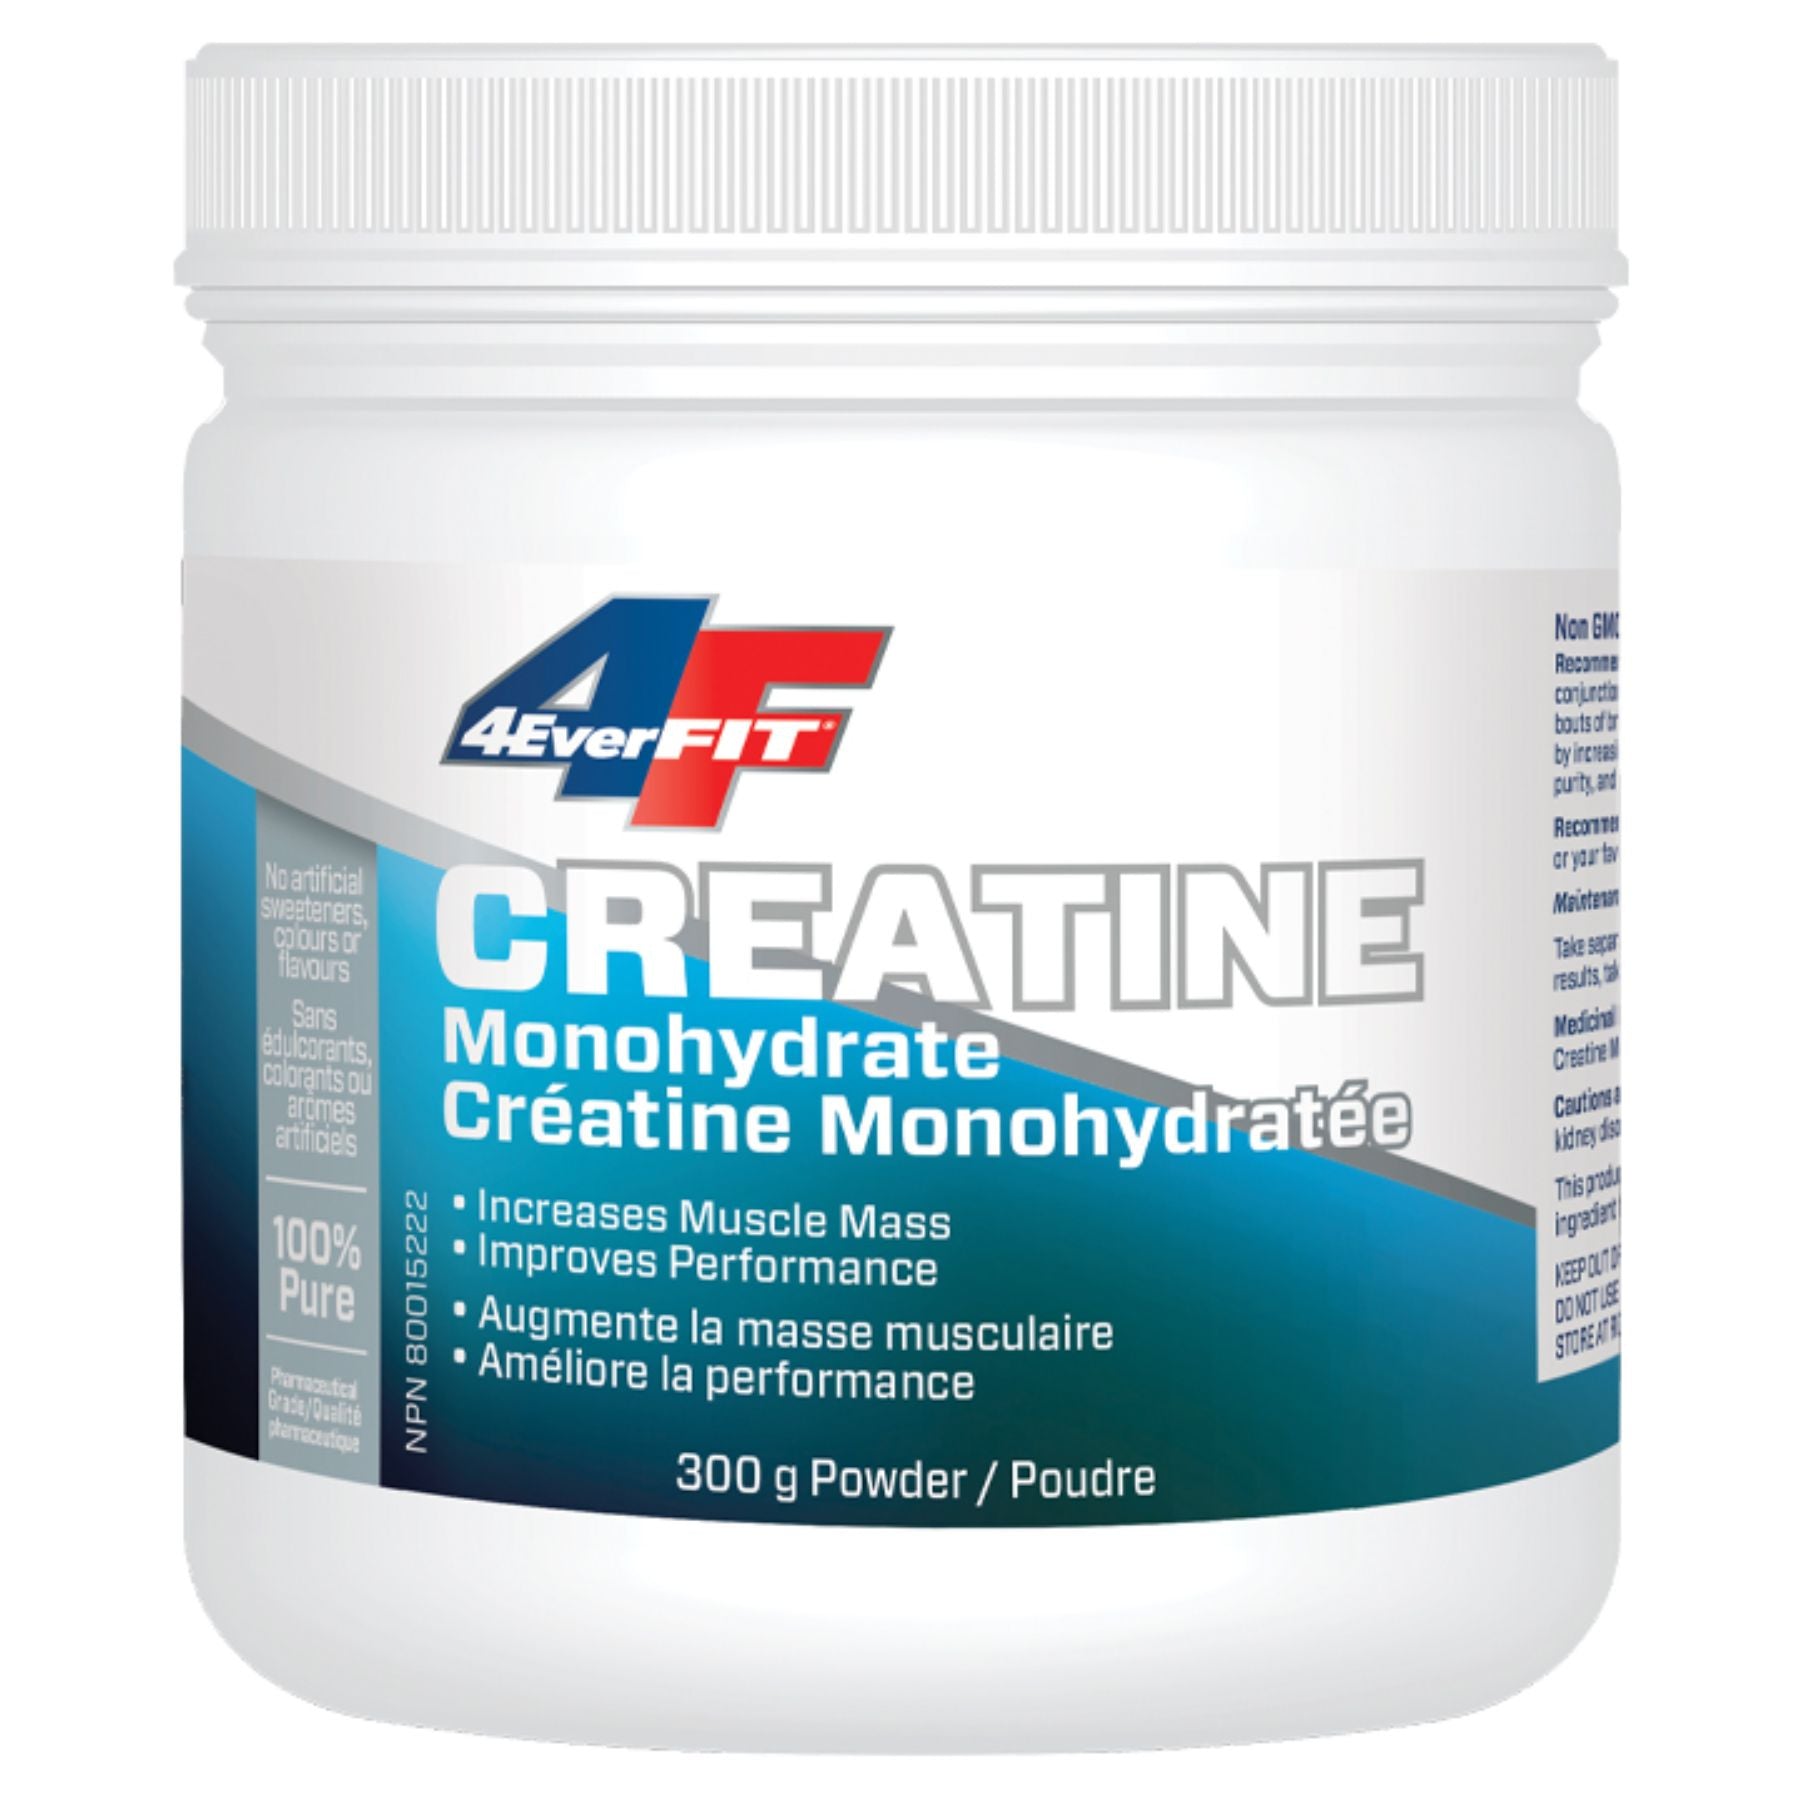 4ever Fit Creatine Monohydrate 300g